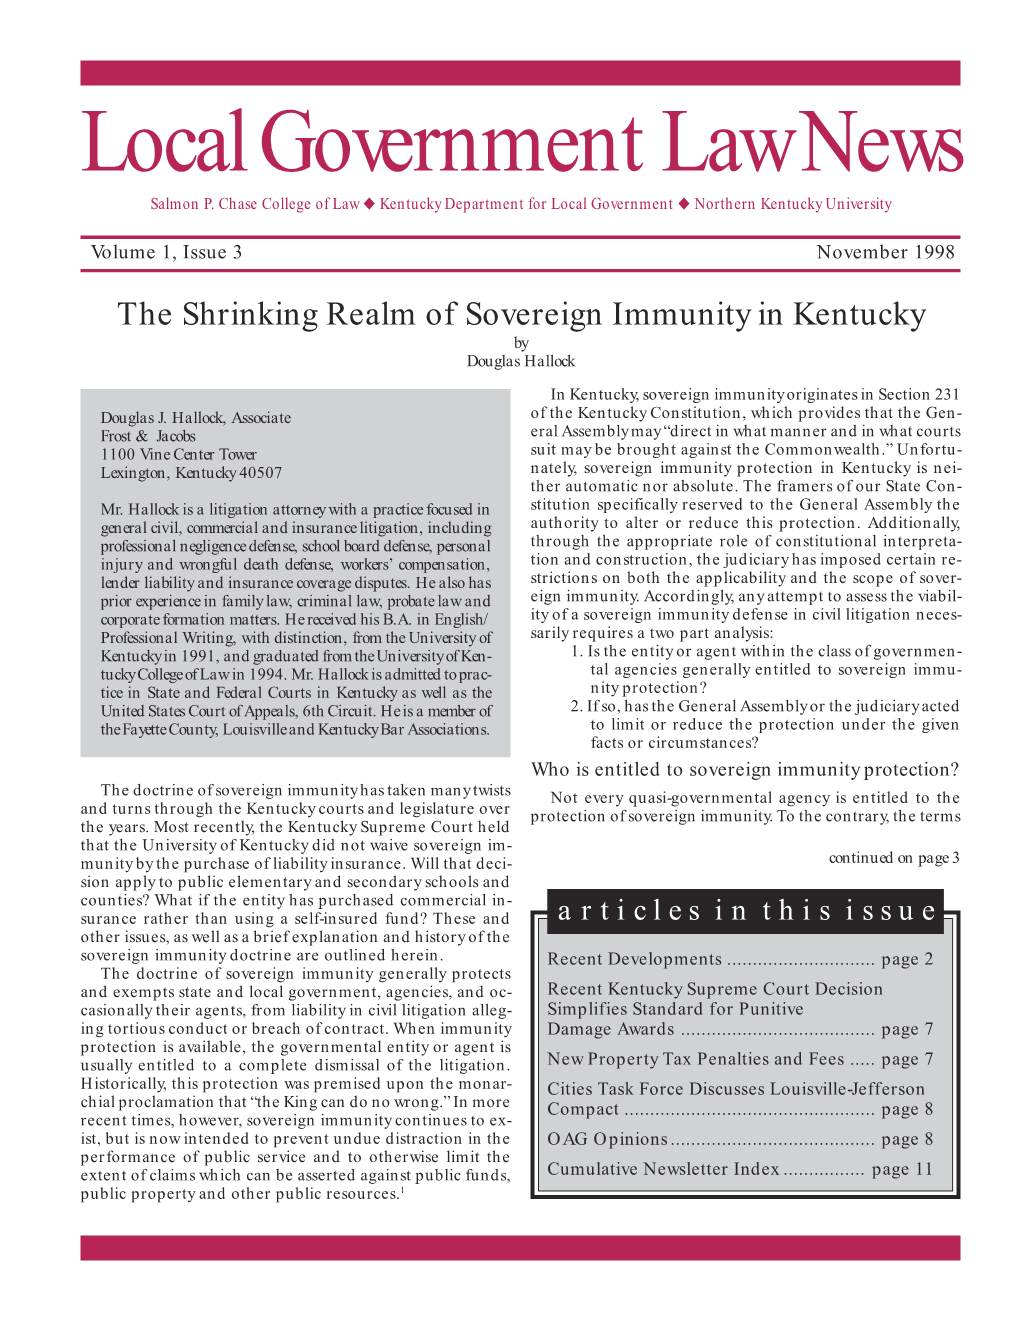 The Shrinking Realm of Sovereign Immunity in Kentucky by Douglas Hallock in Kentucky, Sovereign Immunity Originates in Section 231 Douglas J